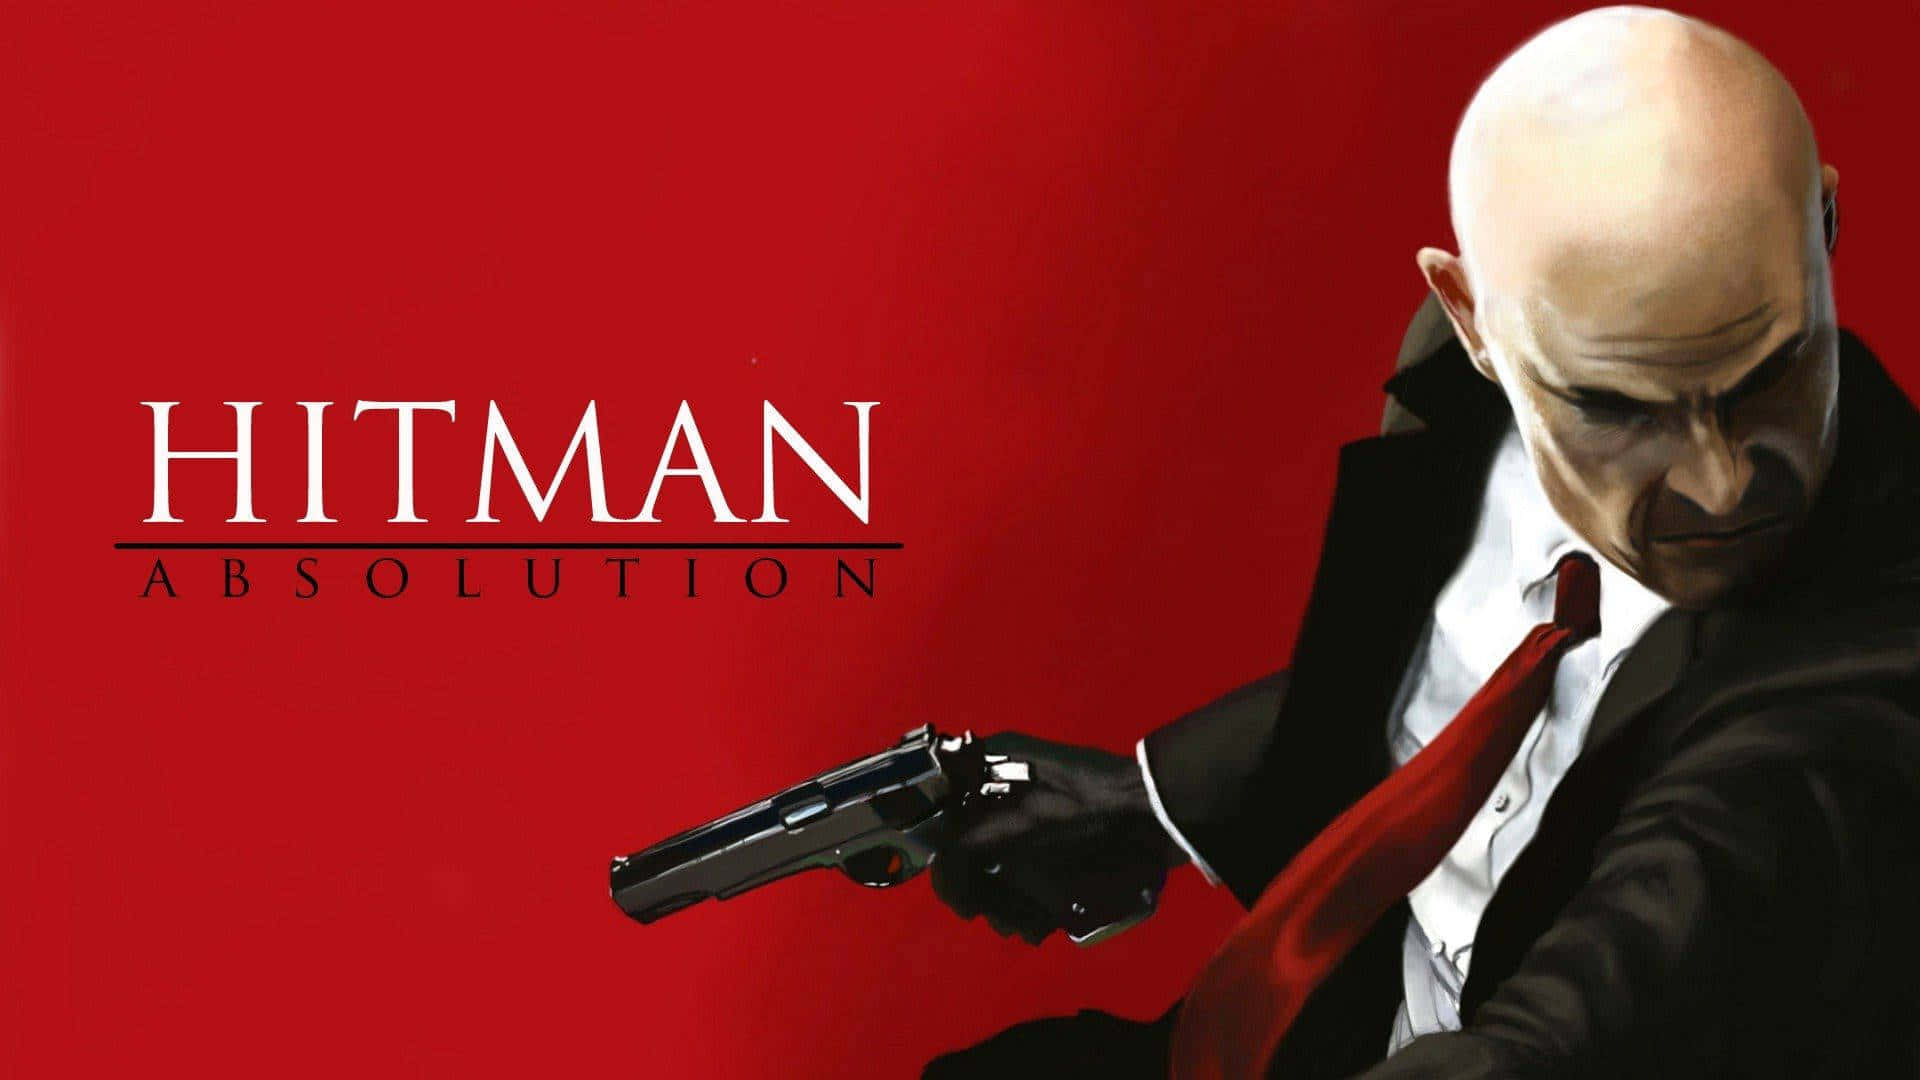 Agent 47 takes on his greatest challenge in Hitman: Absolution